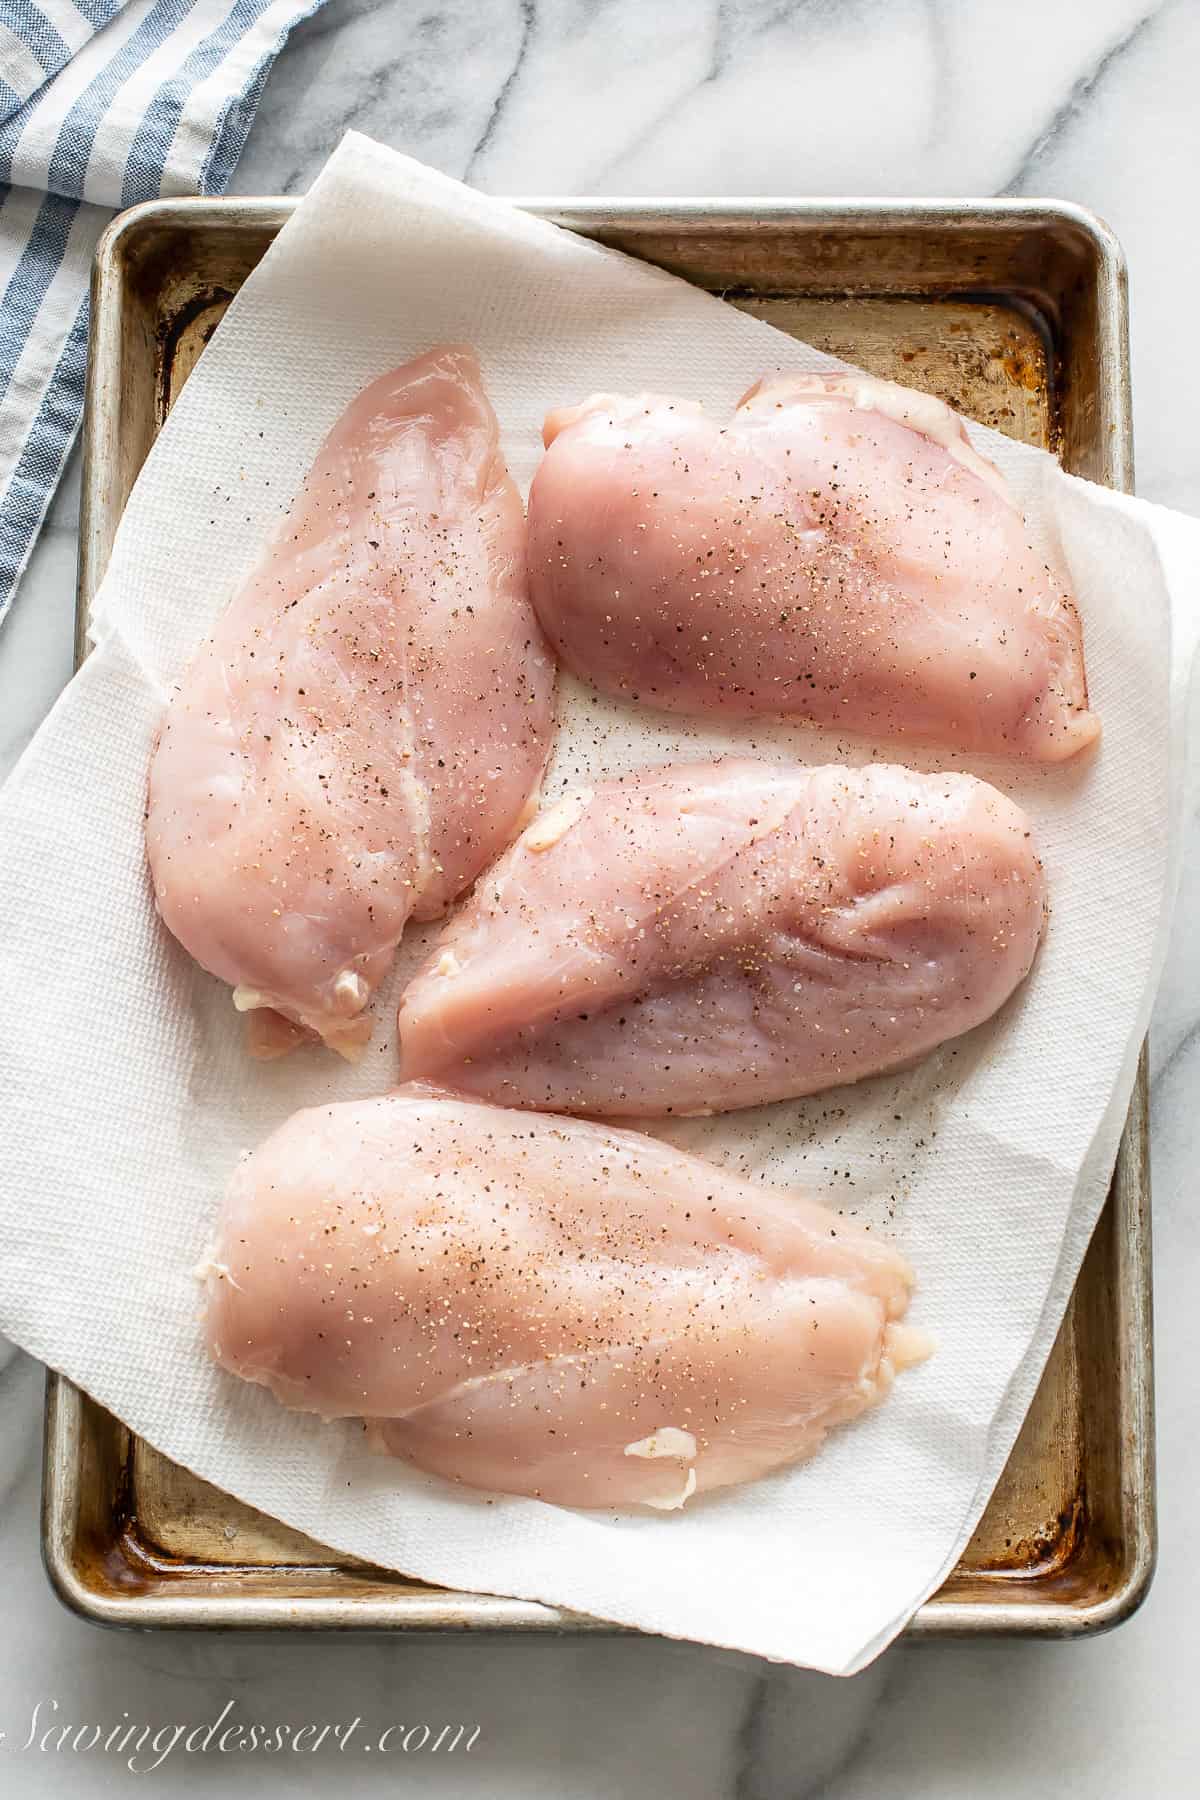 Chicken breasts on a tray lined with paper towels